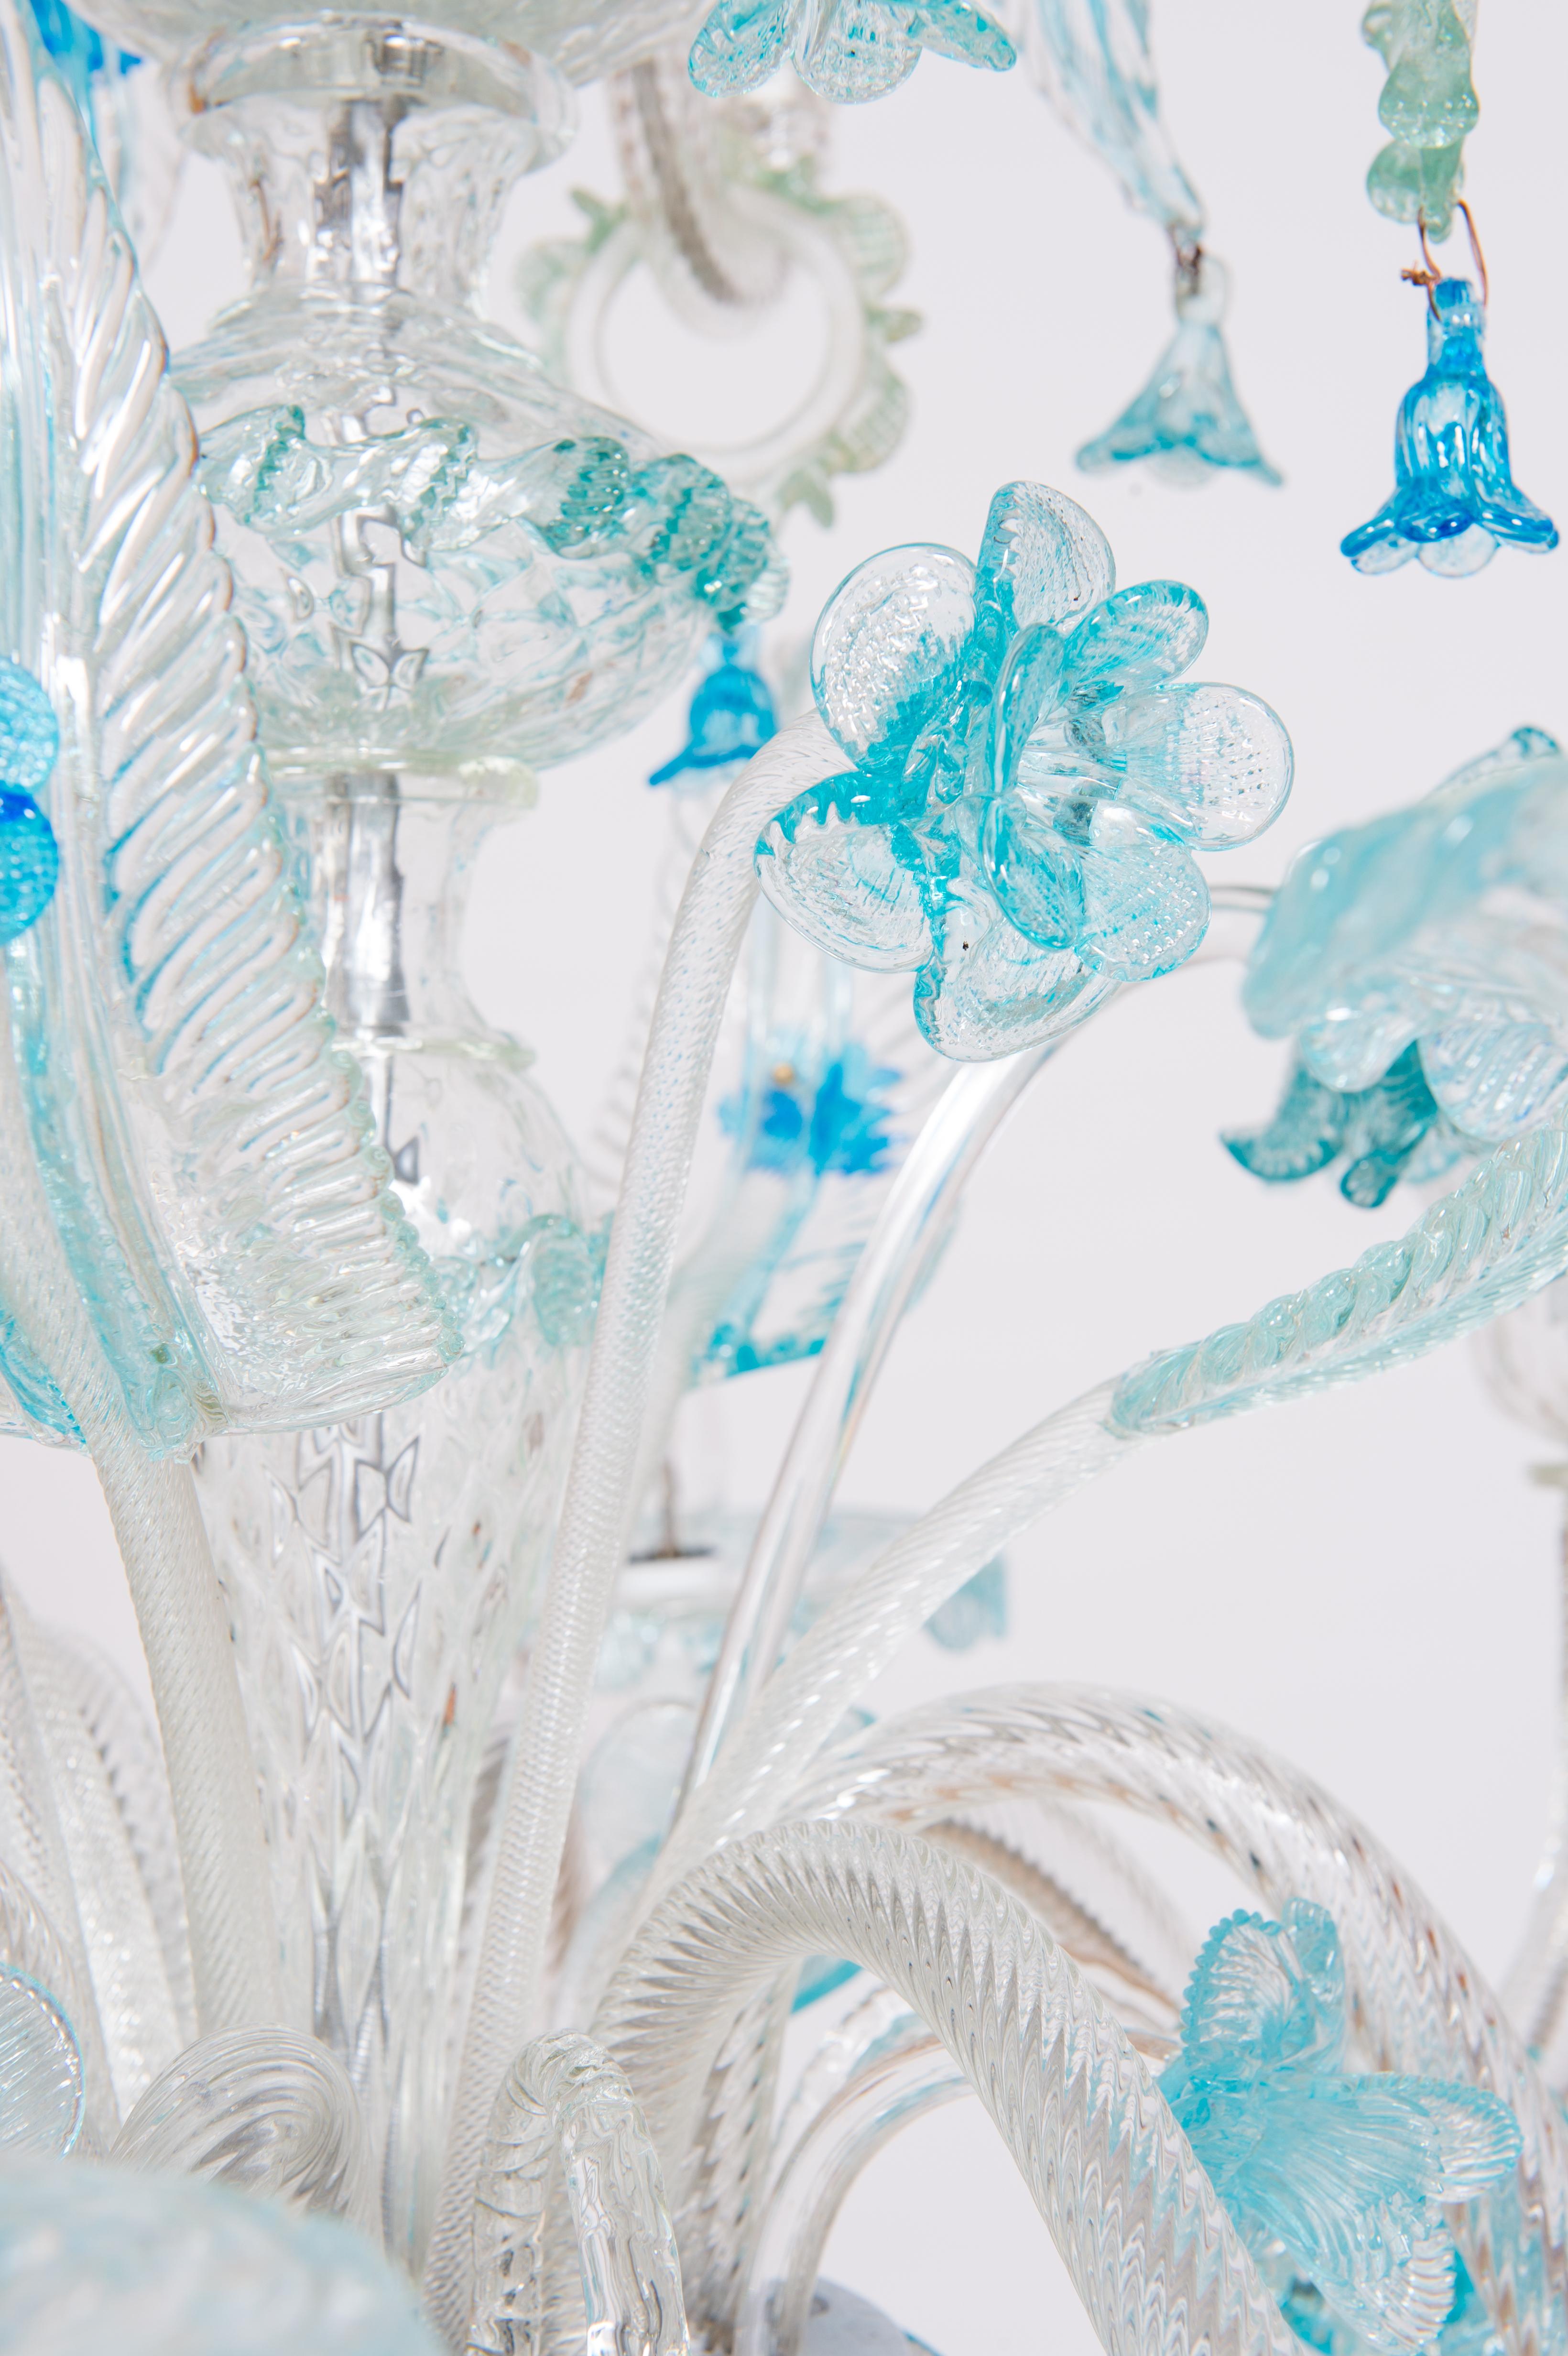 Double Tiered Murano Glass Chandelier in vivid Blue Floral Patterns 1990s Italy For Sale 6